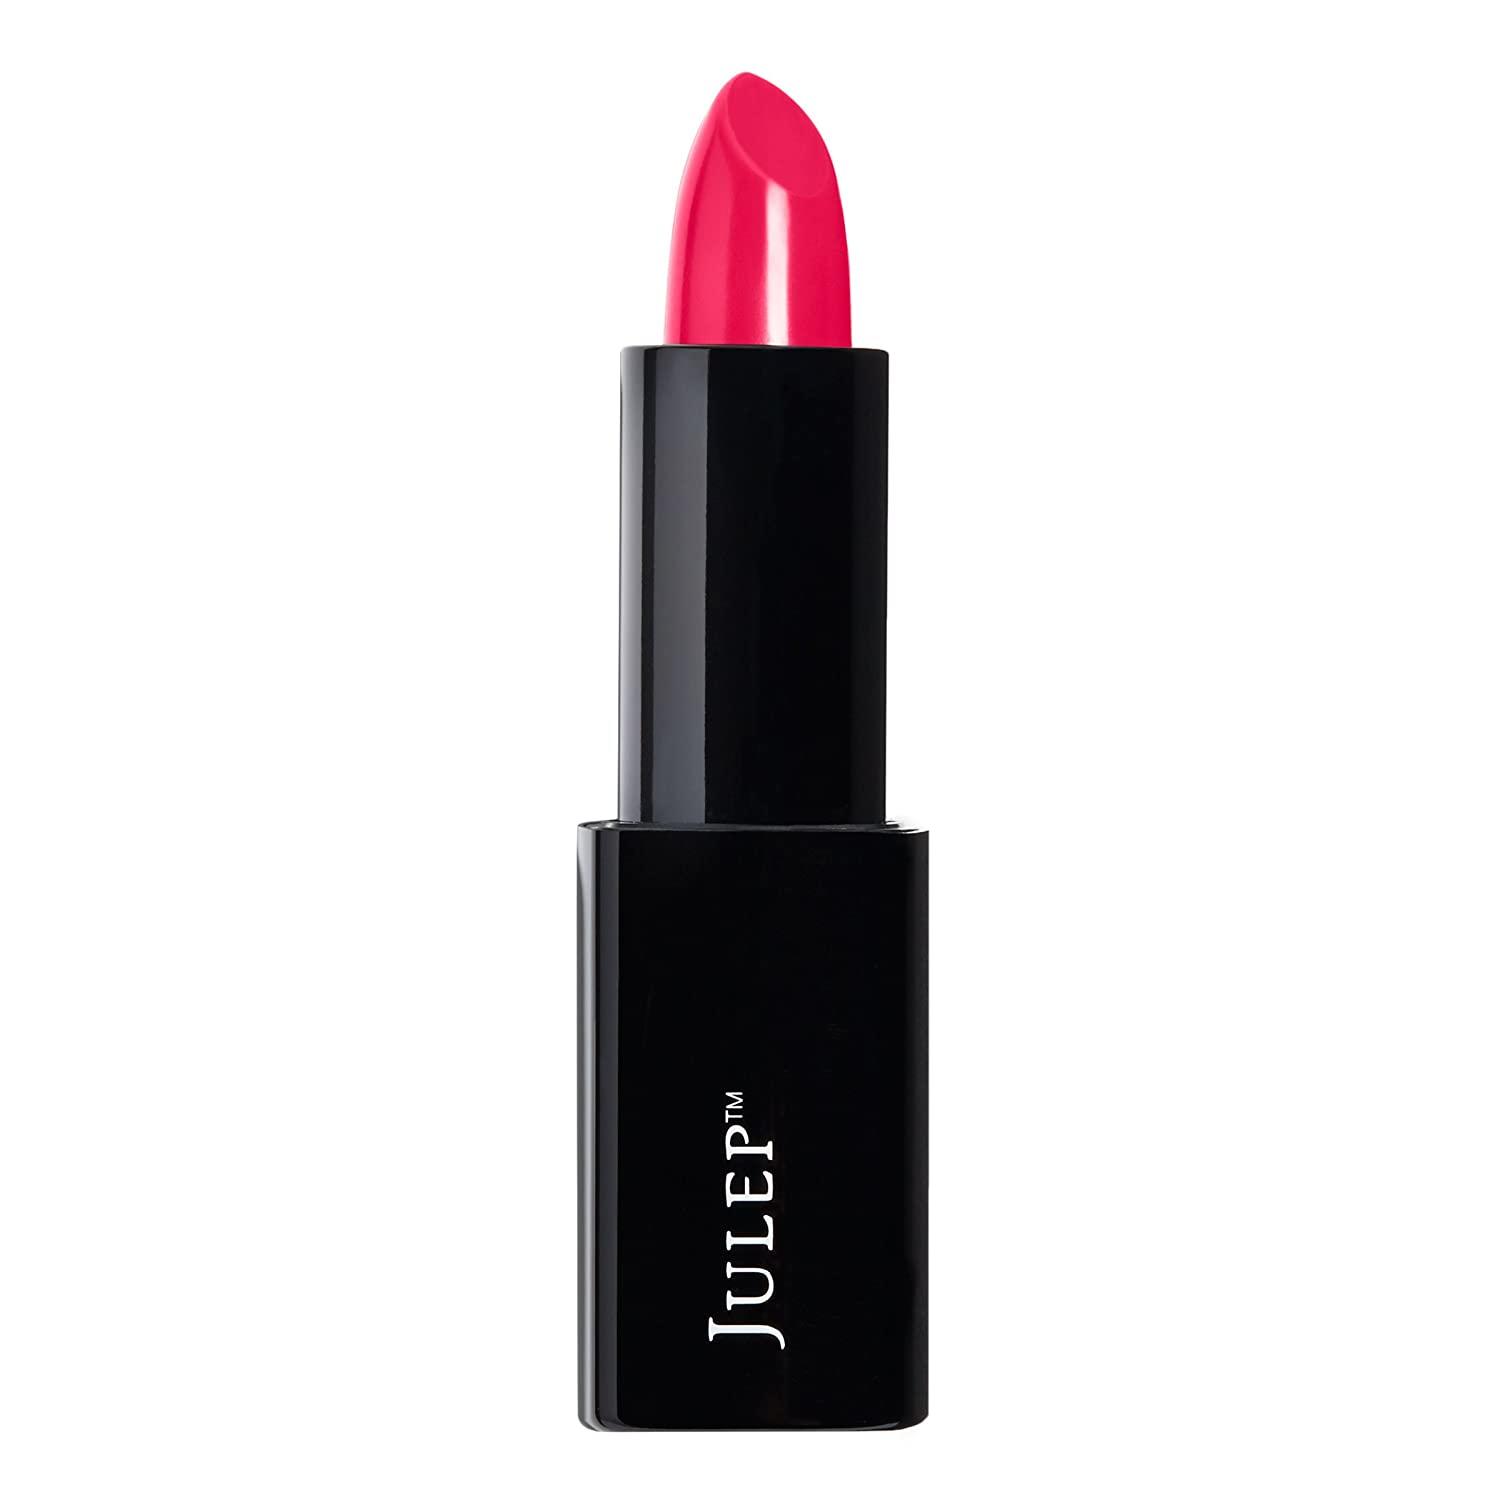 Julep Light On Your Lips Lipstick Stepping Out